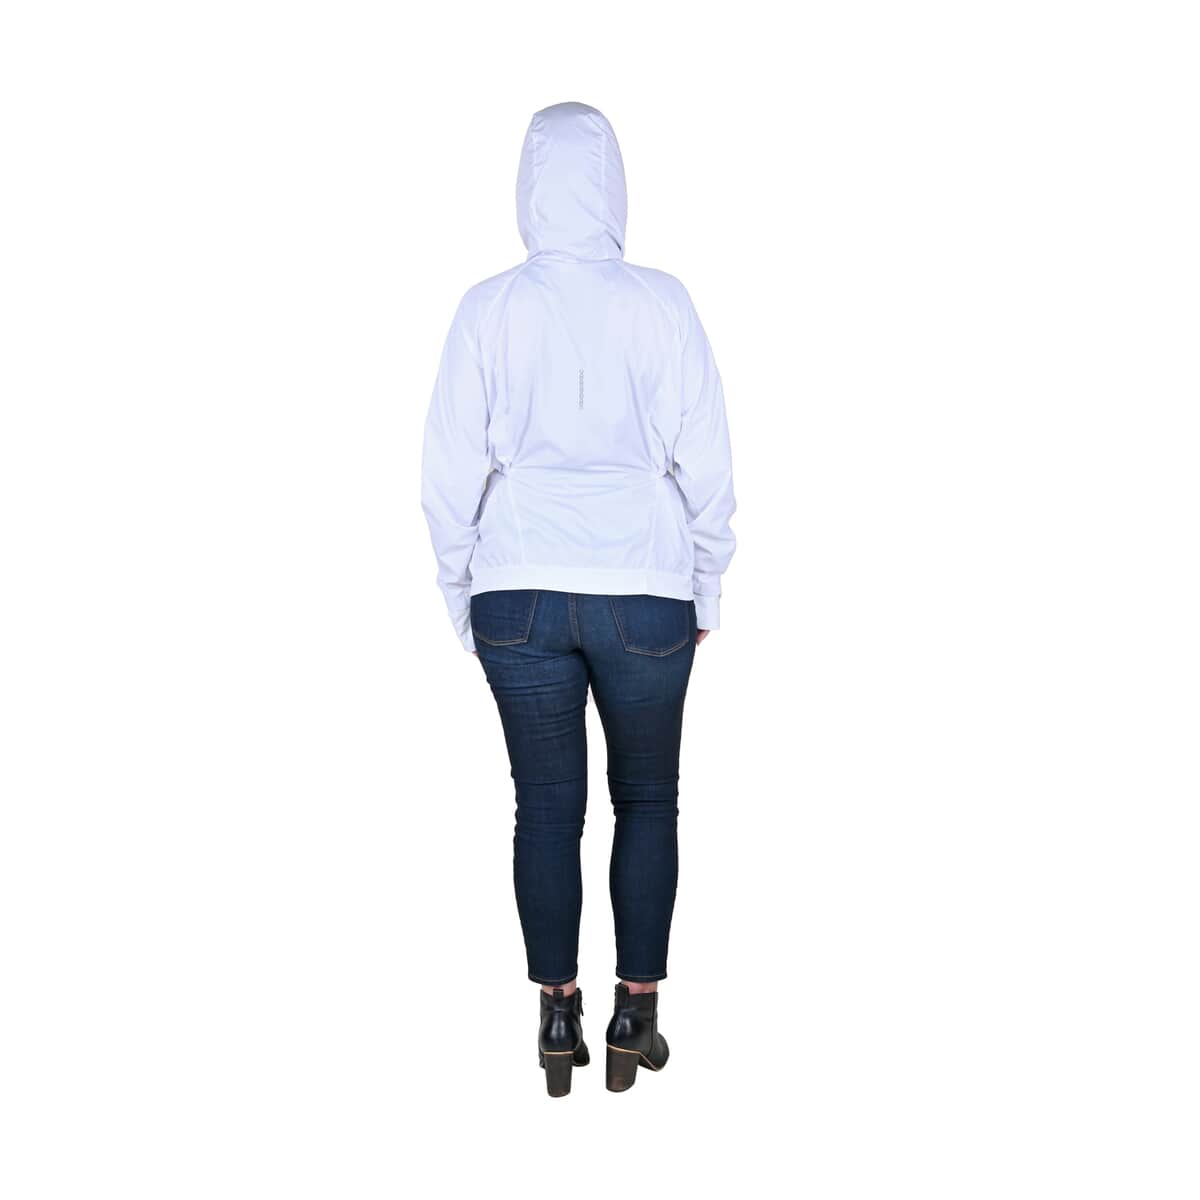 LAYER8 White Hooded Windbreaker - Small image number 1